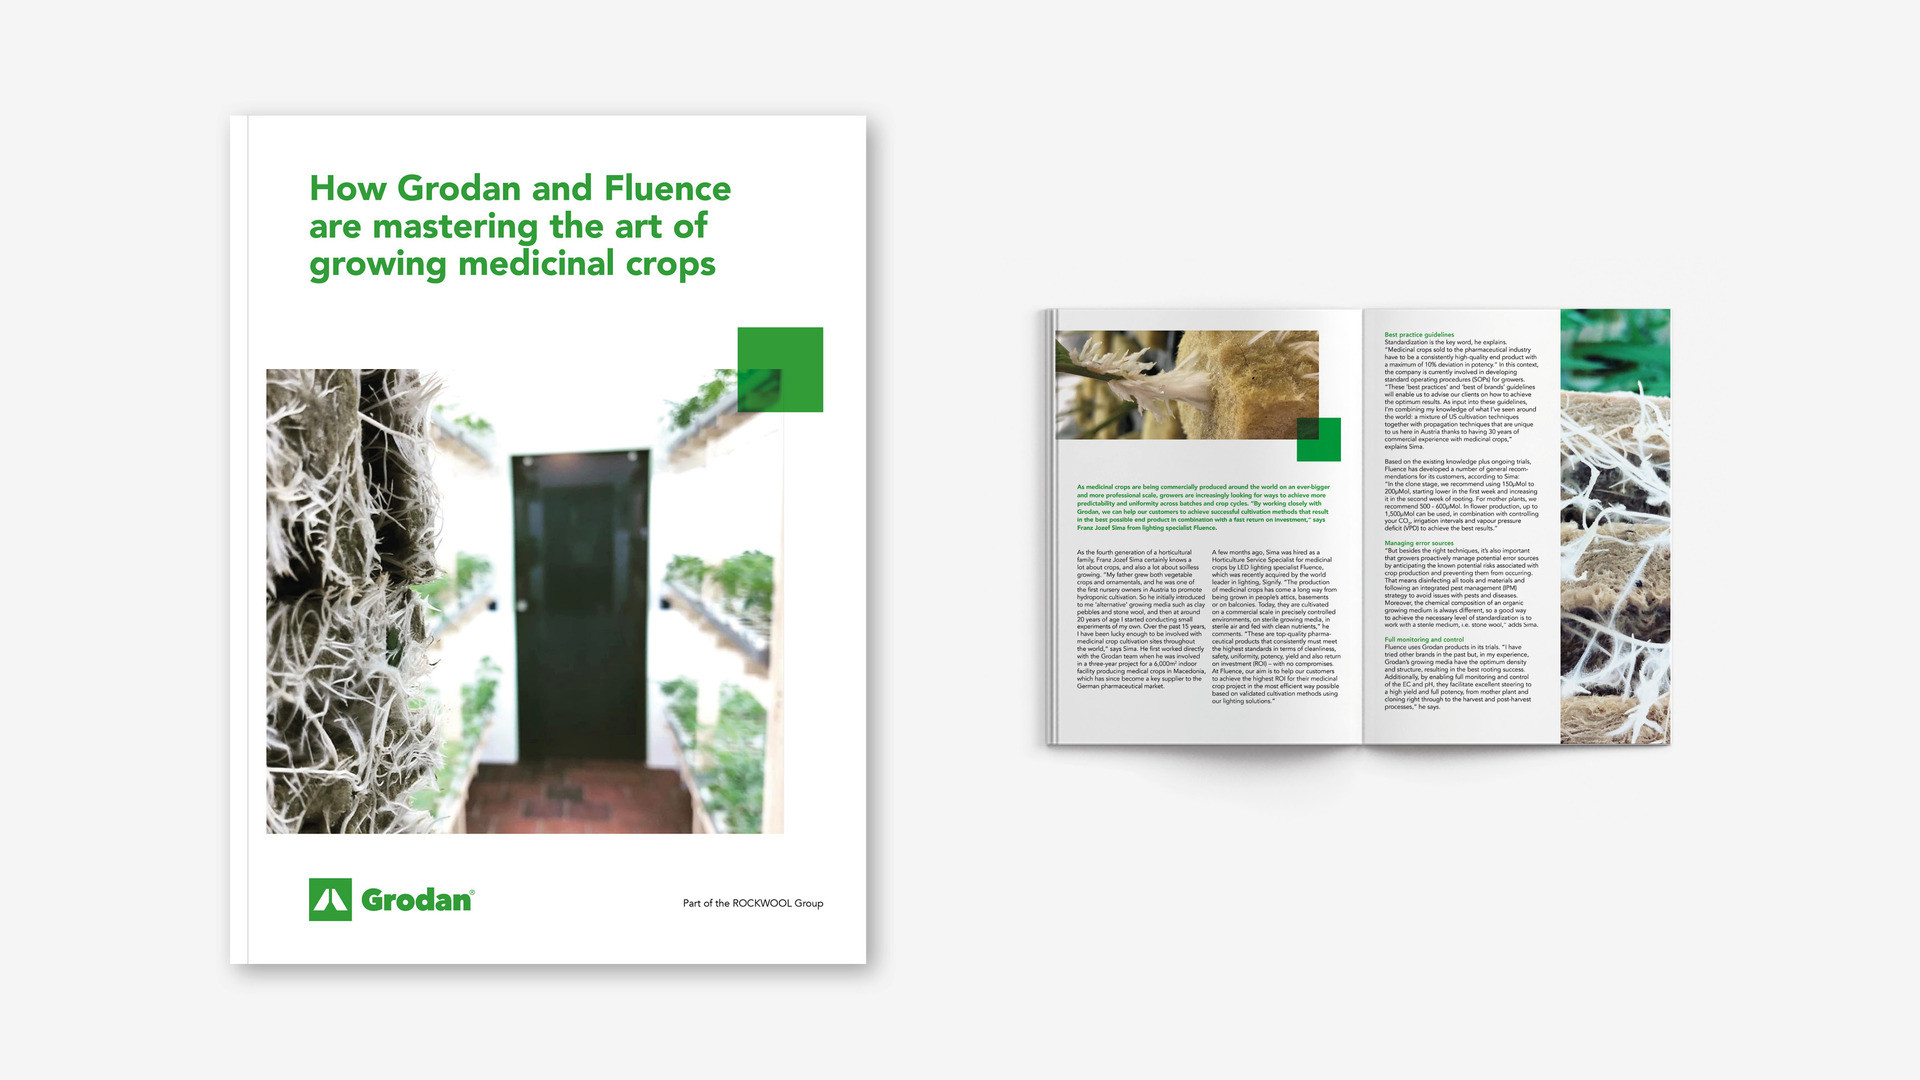 Whitepaper: How Grodan and Fluence are mastering the art of growing medicinal crops